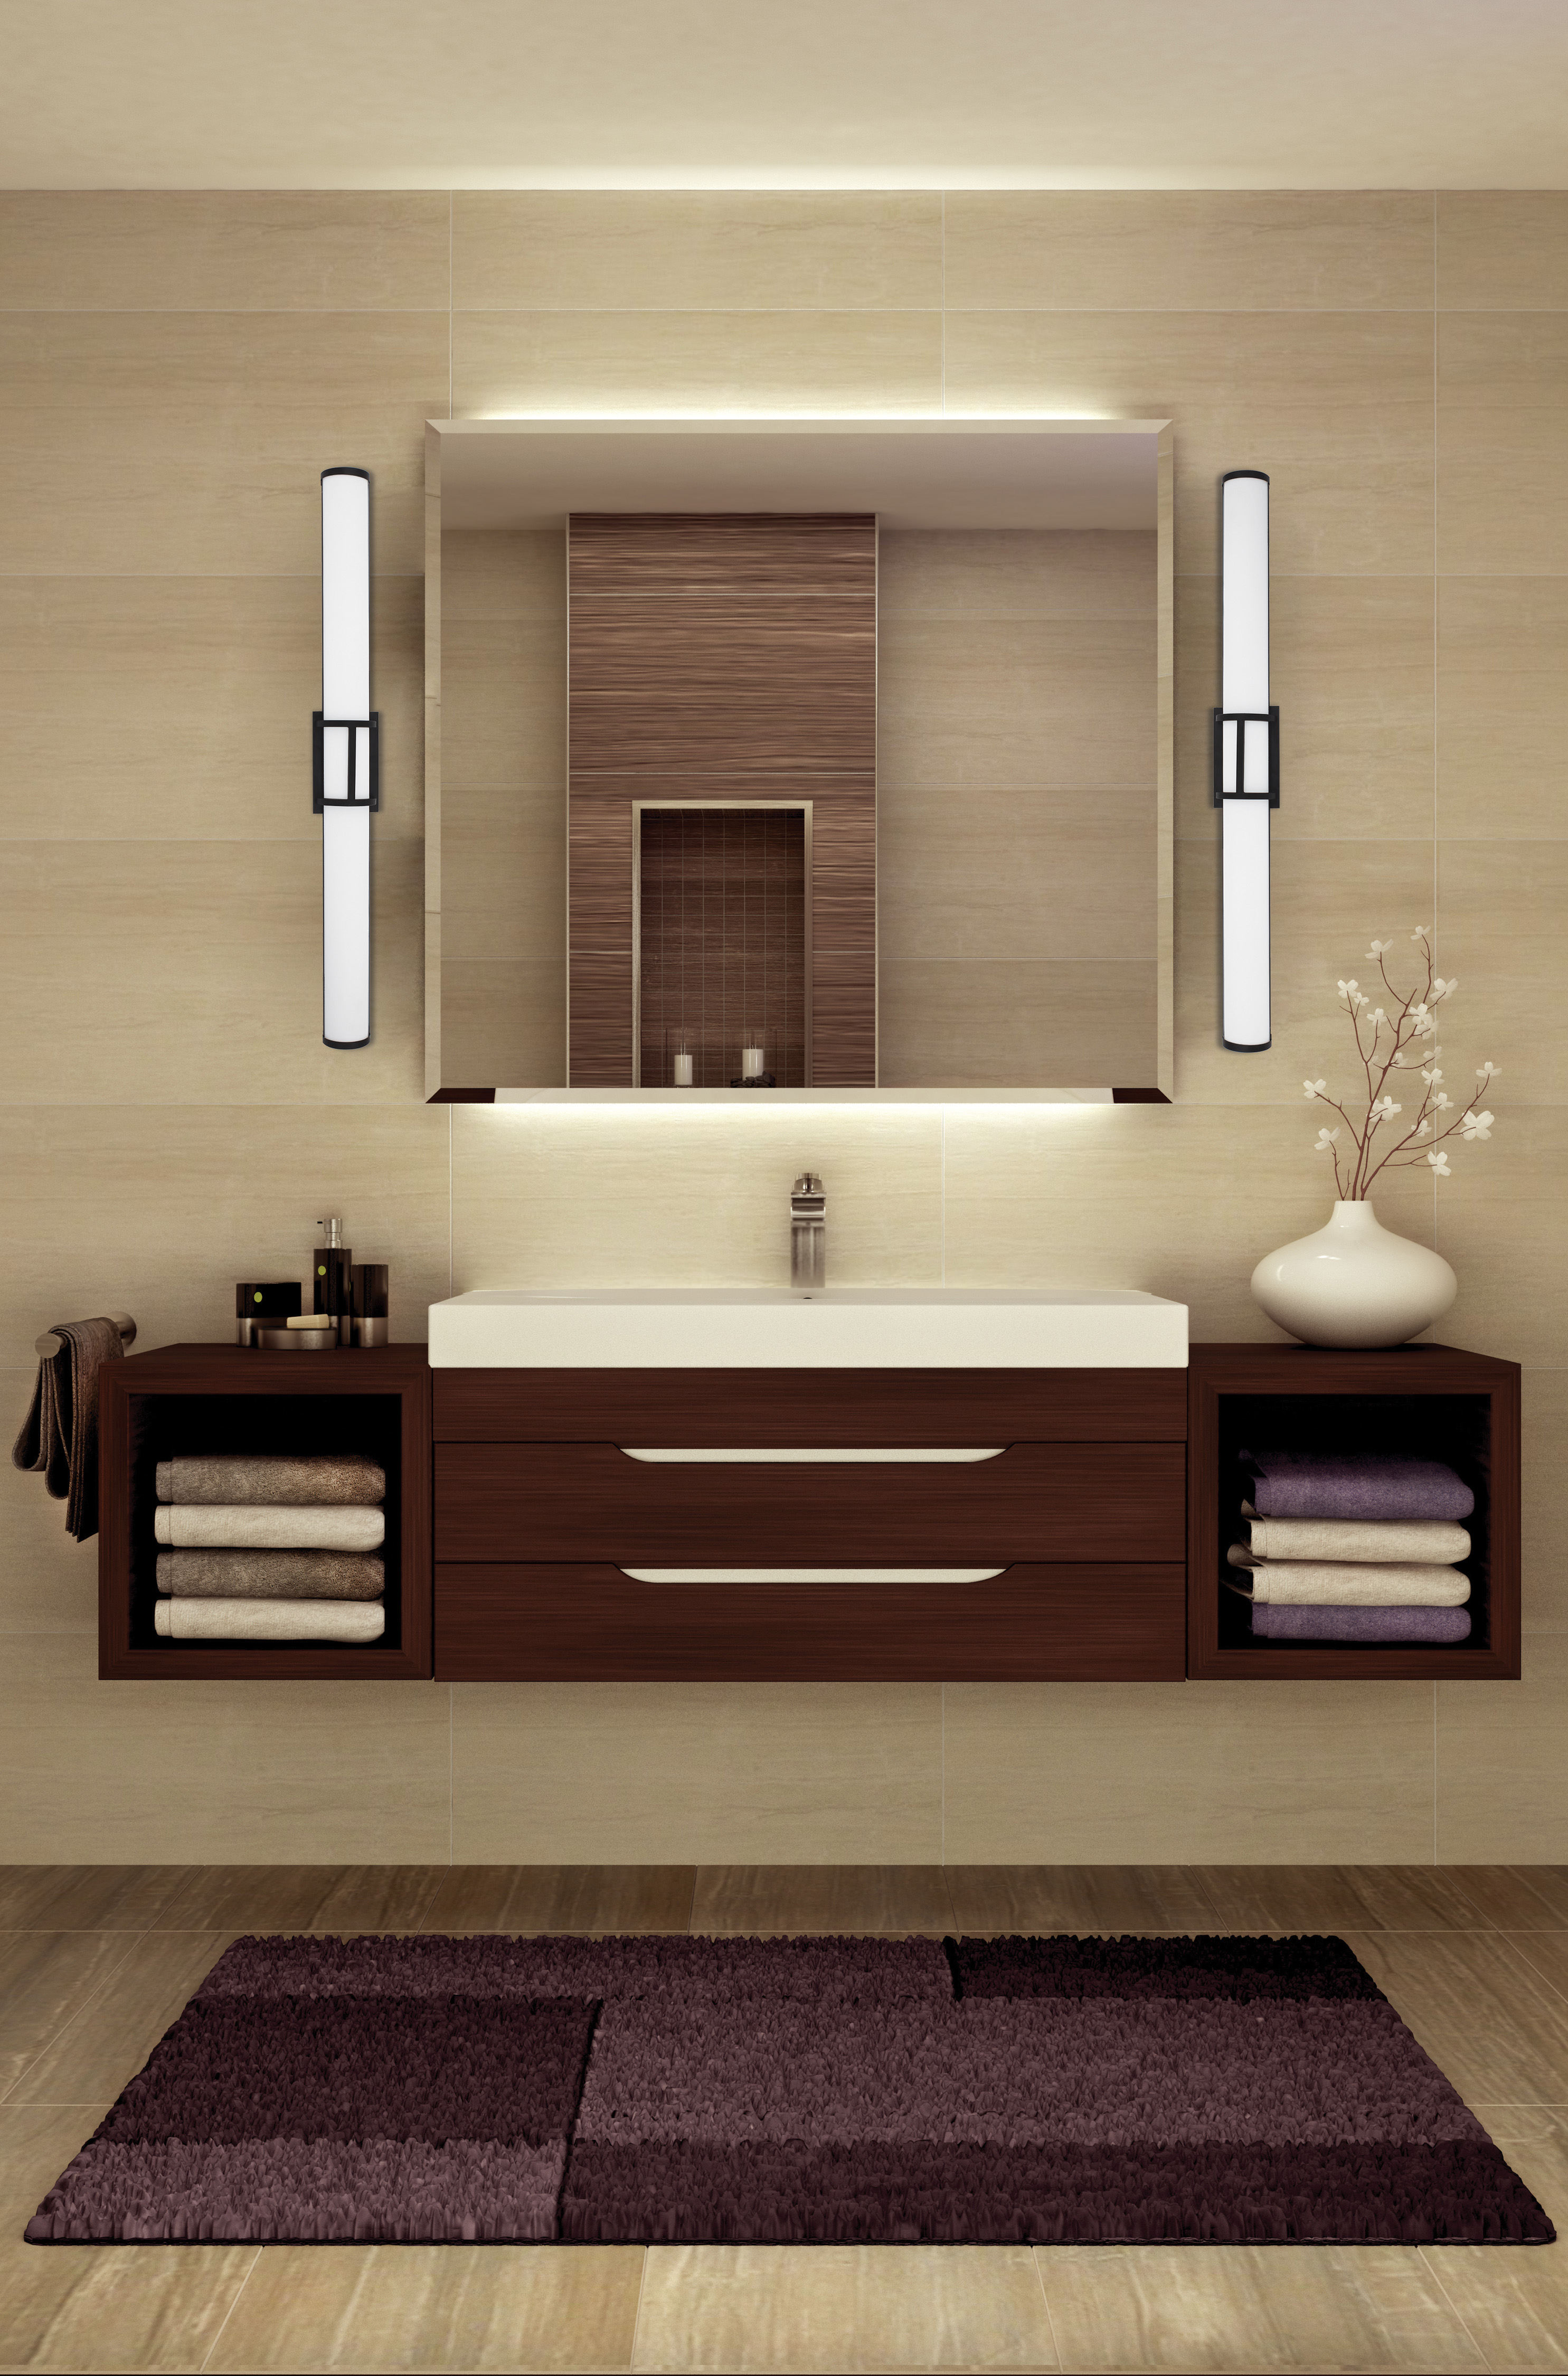 Modern wall sconce RAMARO Eglo 204133A in the bathroom above the wooden vanity with towels and flowerpot